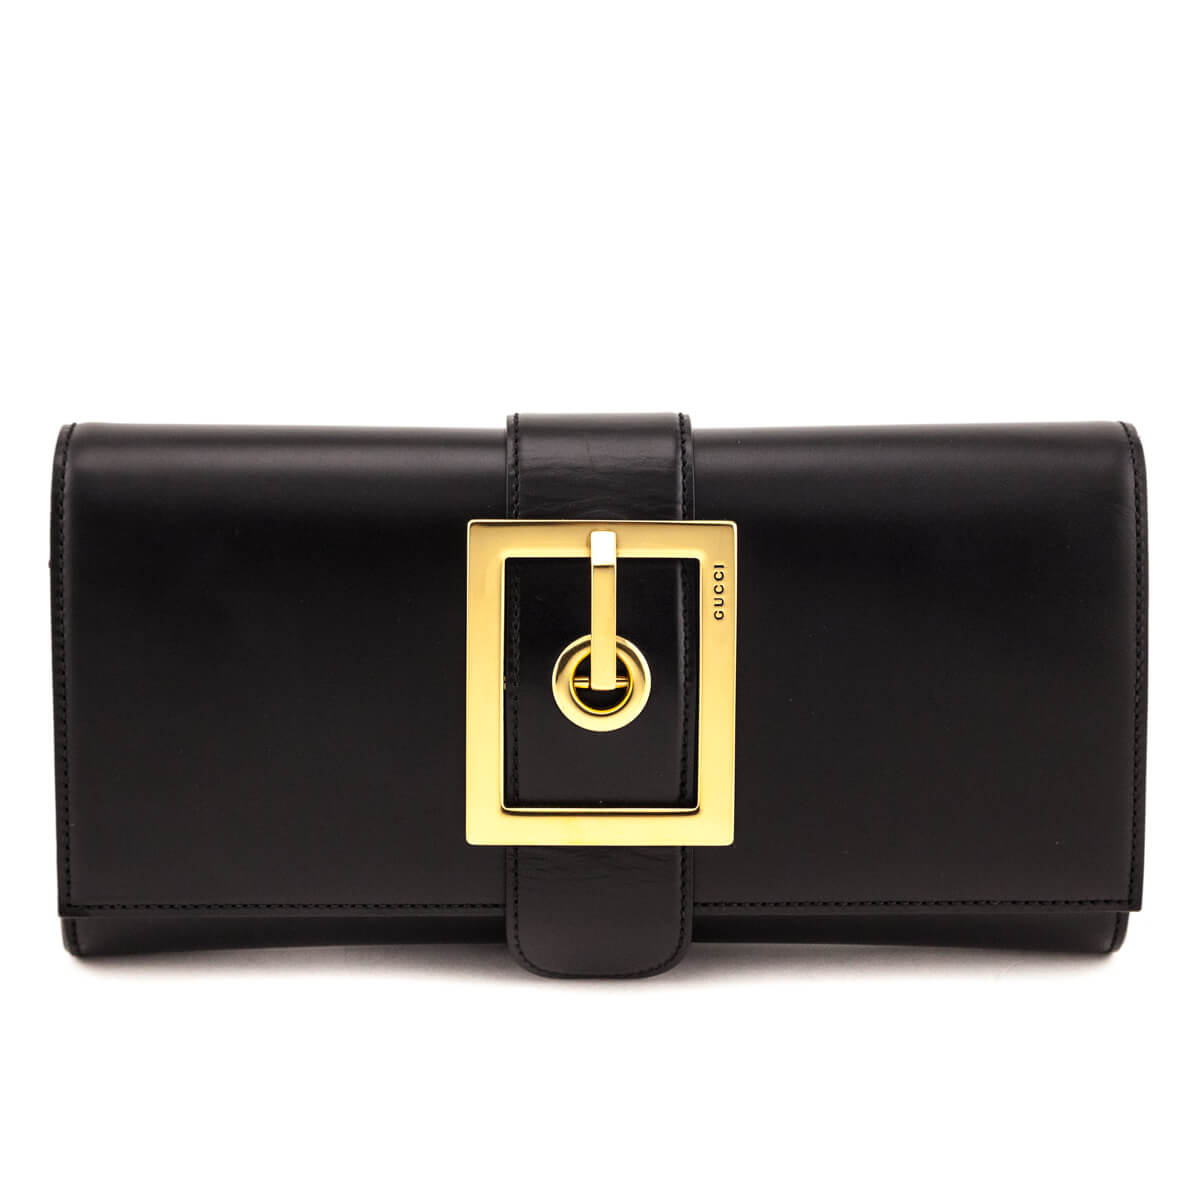 Gucci Black Lady Buckle Clutch - Love that Bag etc - Preowned Authentic Designer Handbags & Preloved Fashions